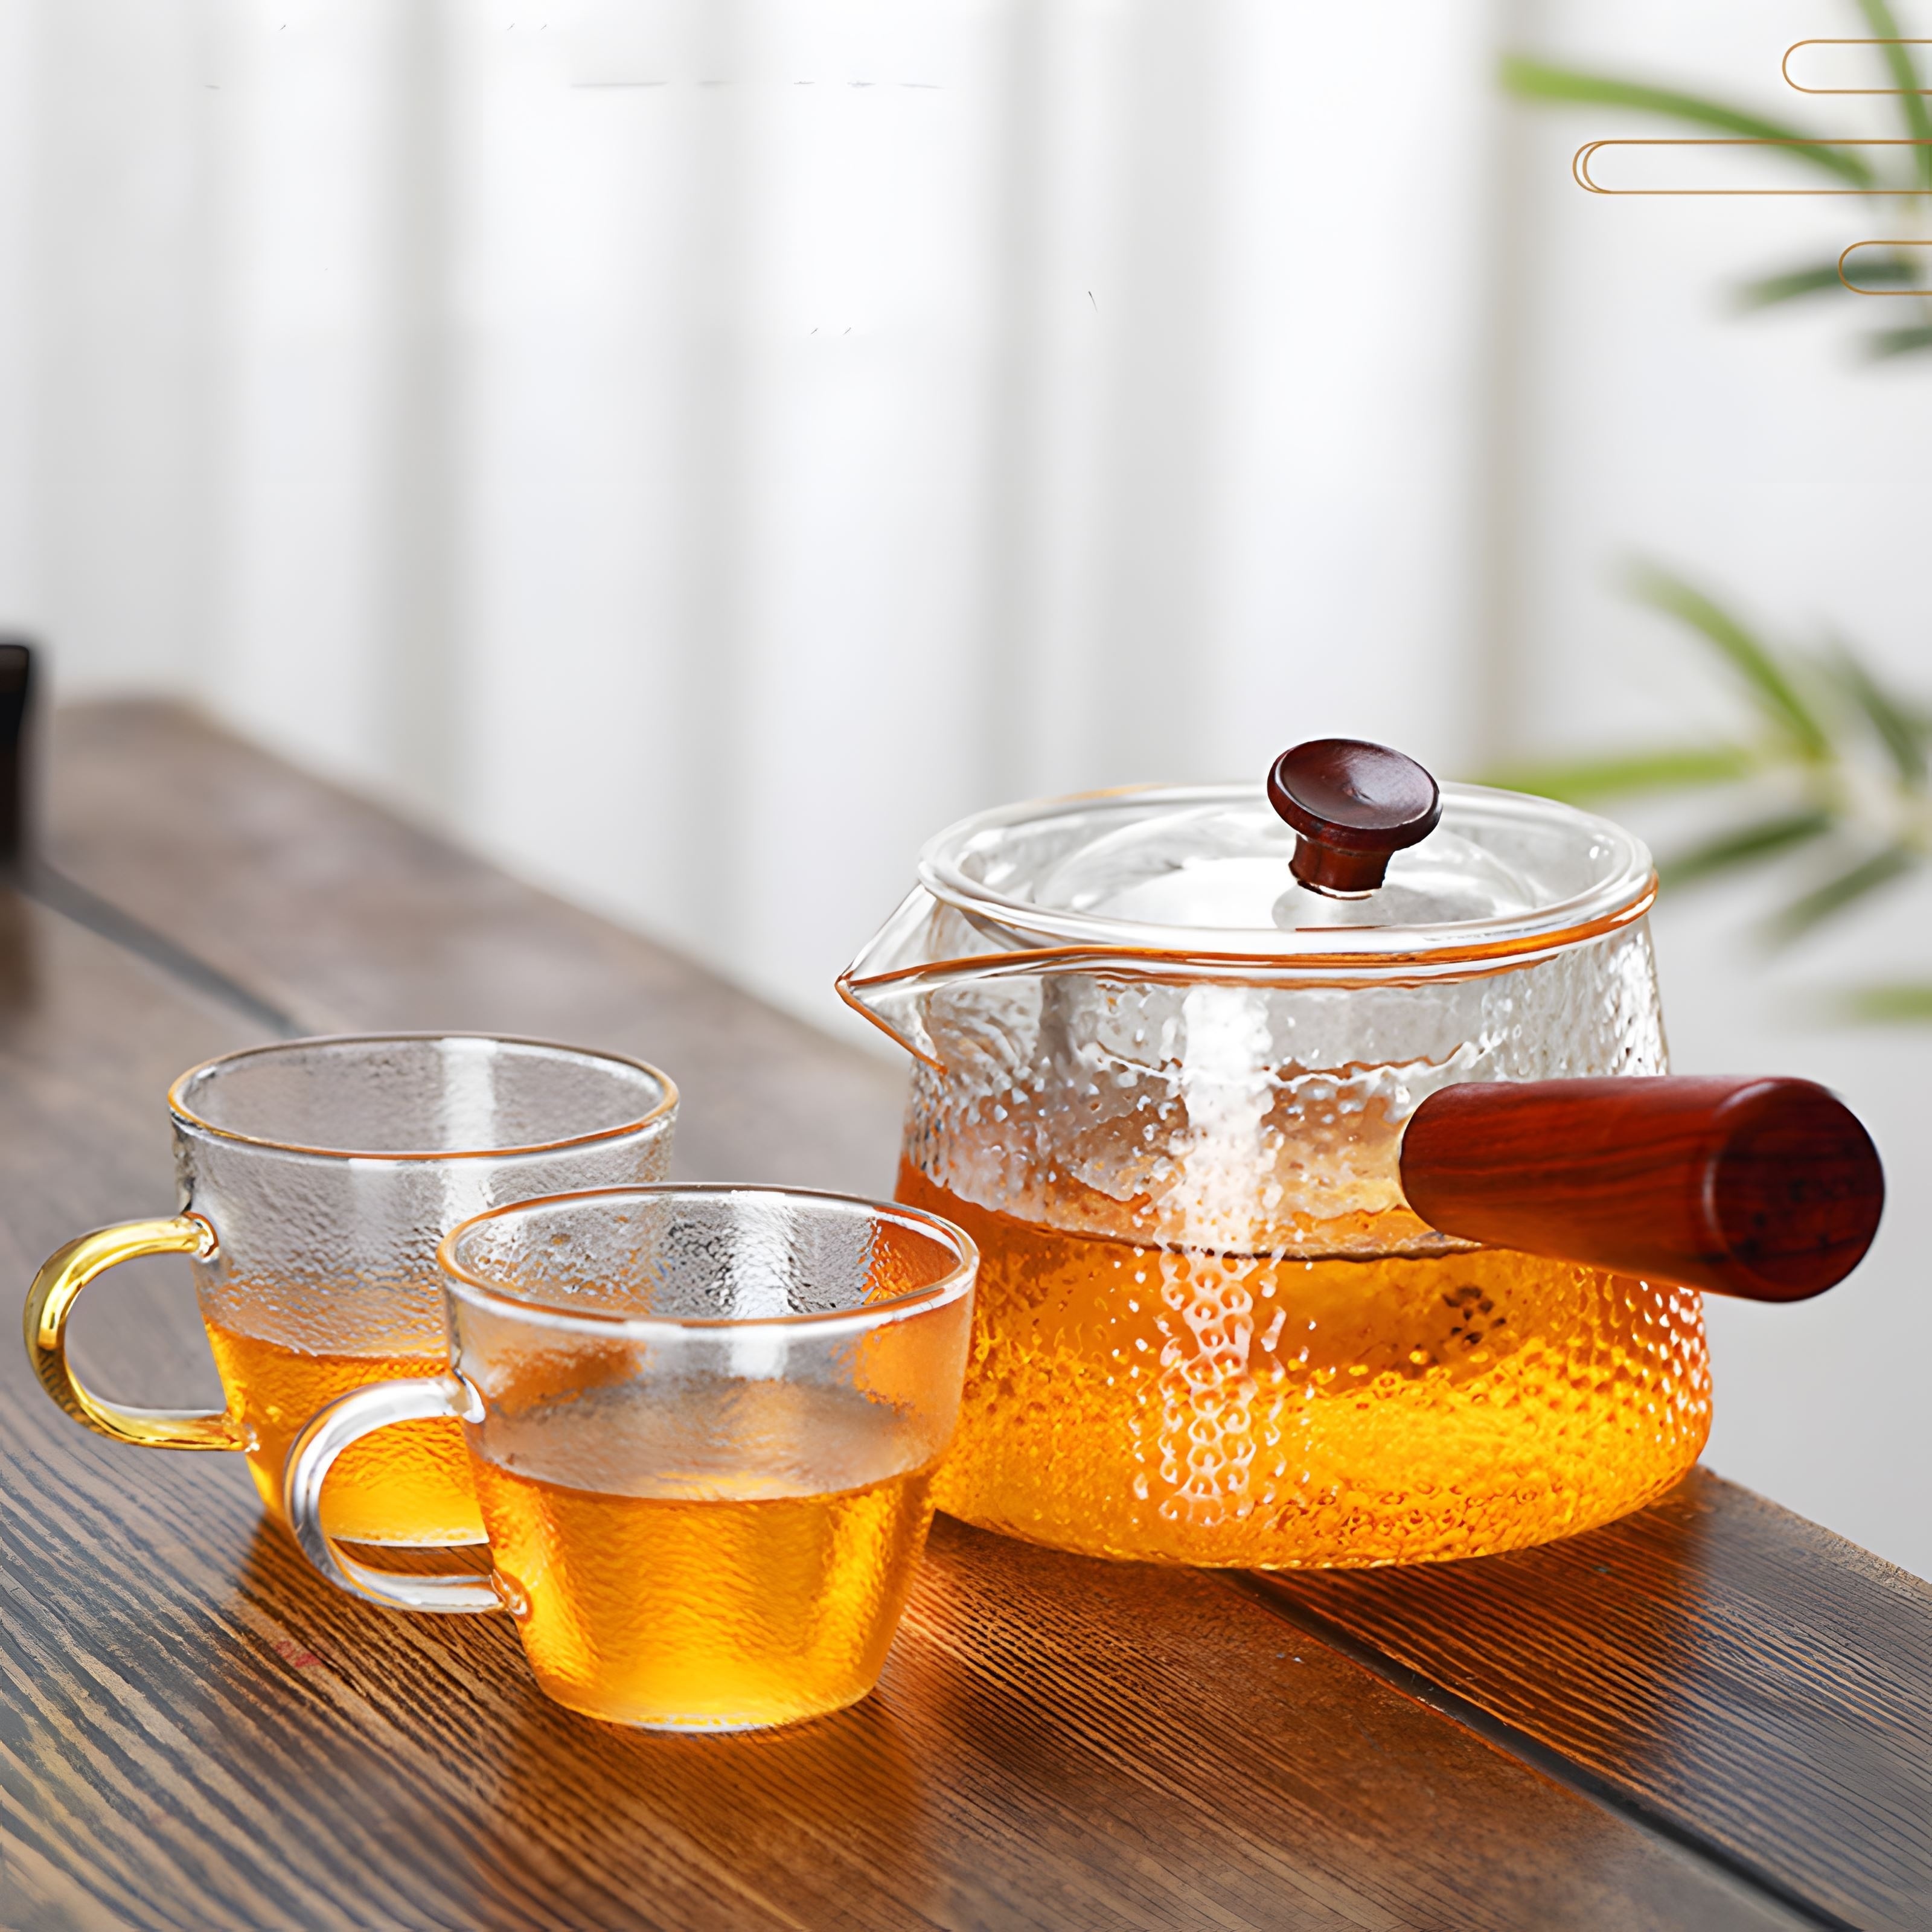 750ml Teapot with Removable Infuser Blooming Tea Maker Iced Tea Pitcher for  Juice Milk Coffee Loose Leaf Tea Maker